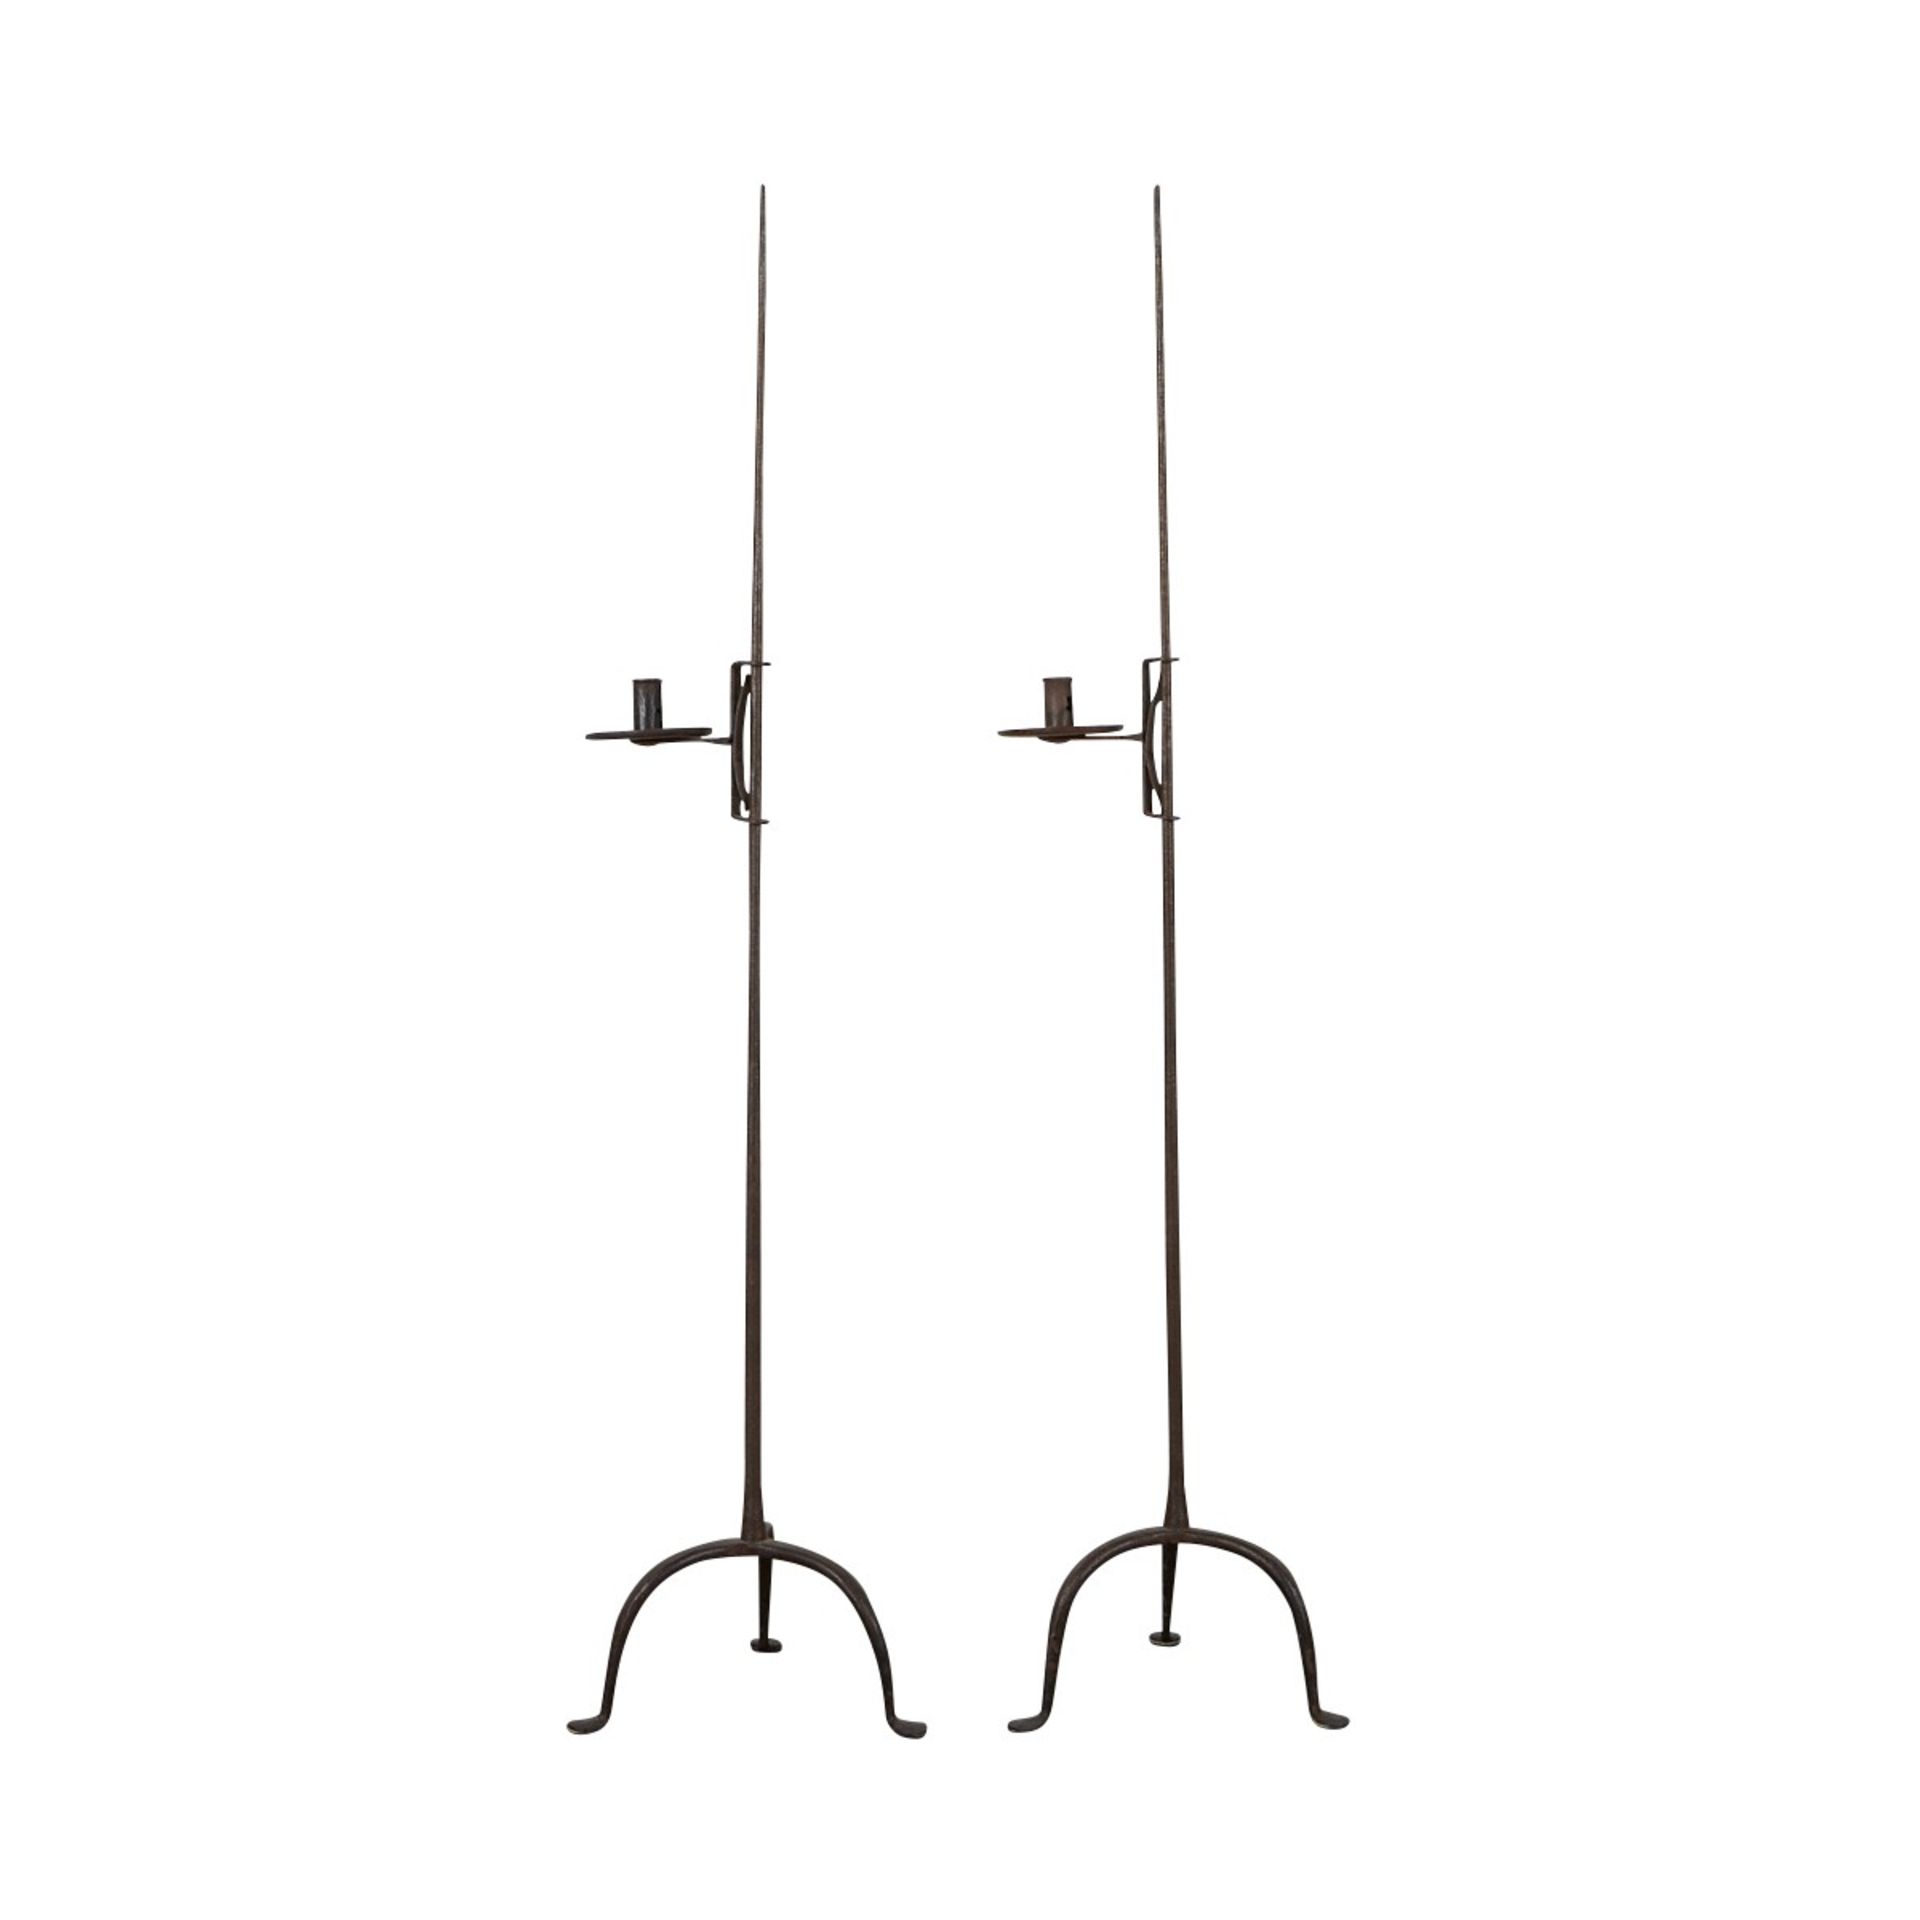 Pair of Wrought Iron Candle Stands - Image 3 of 7